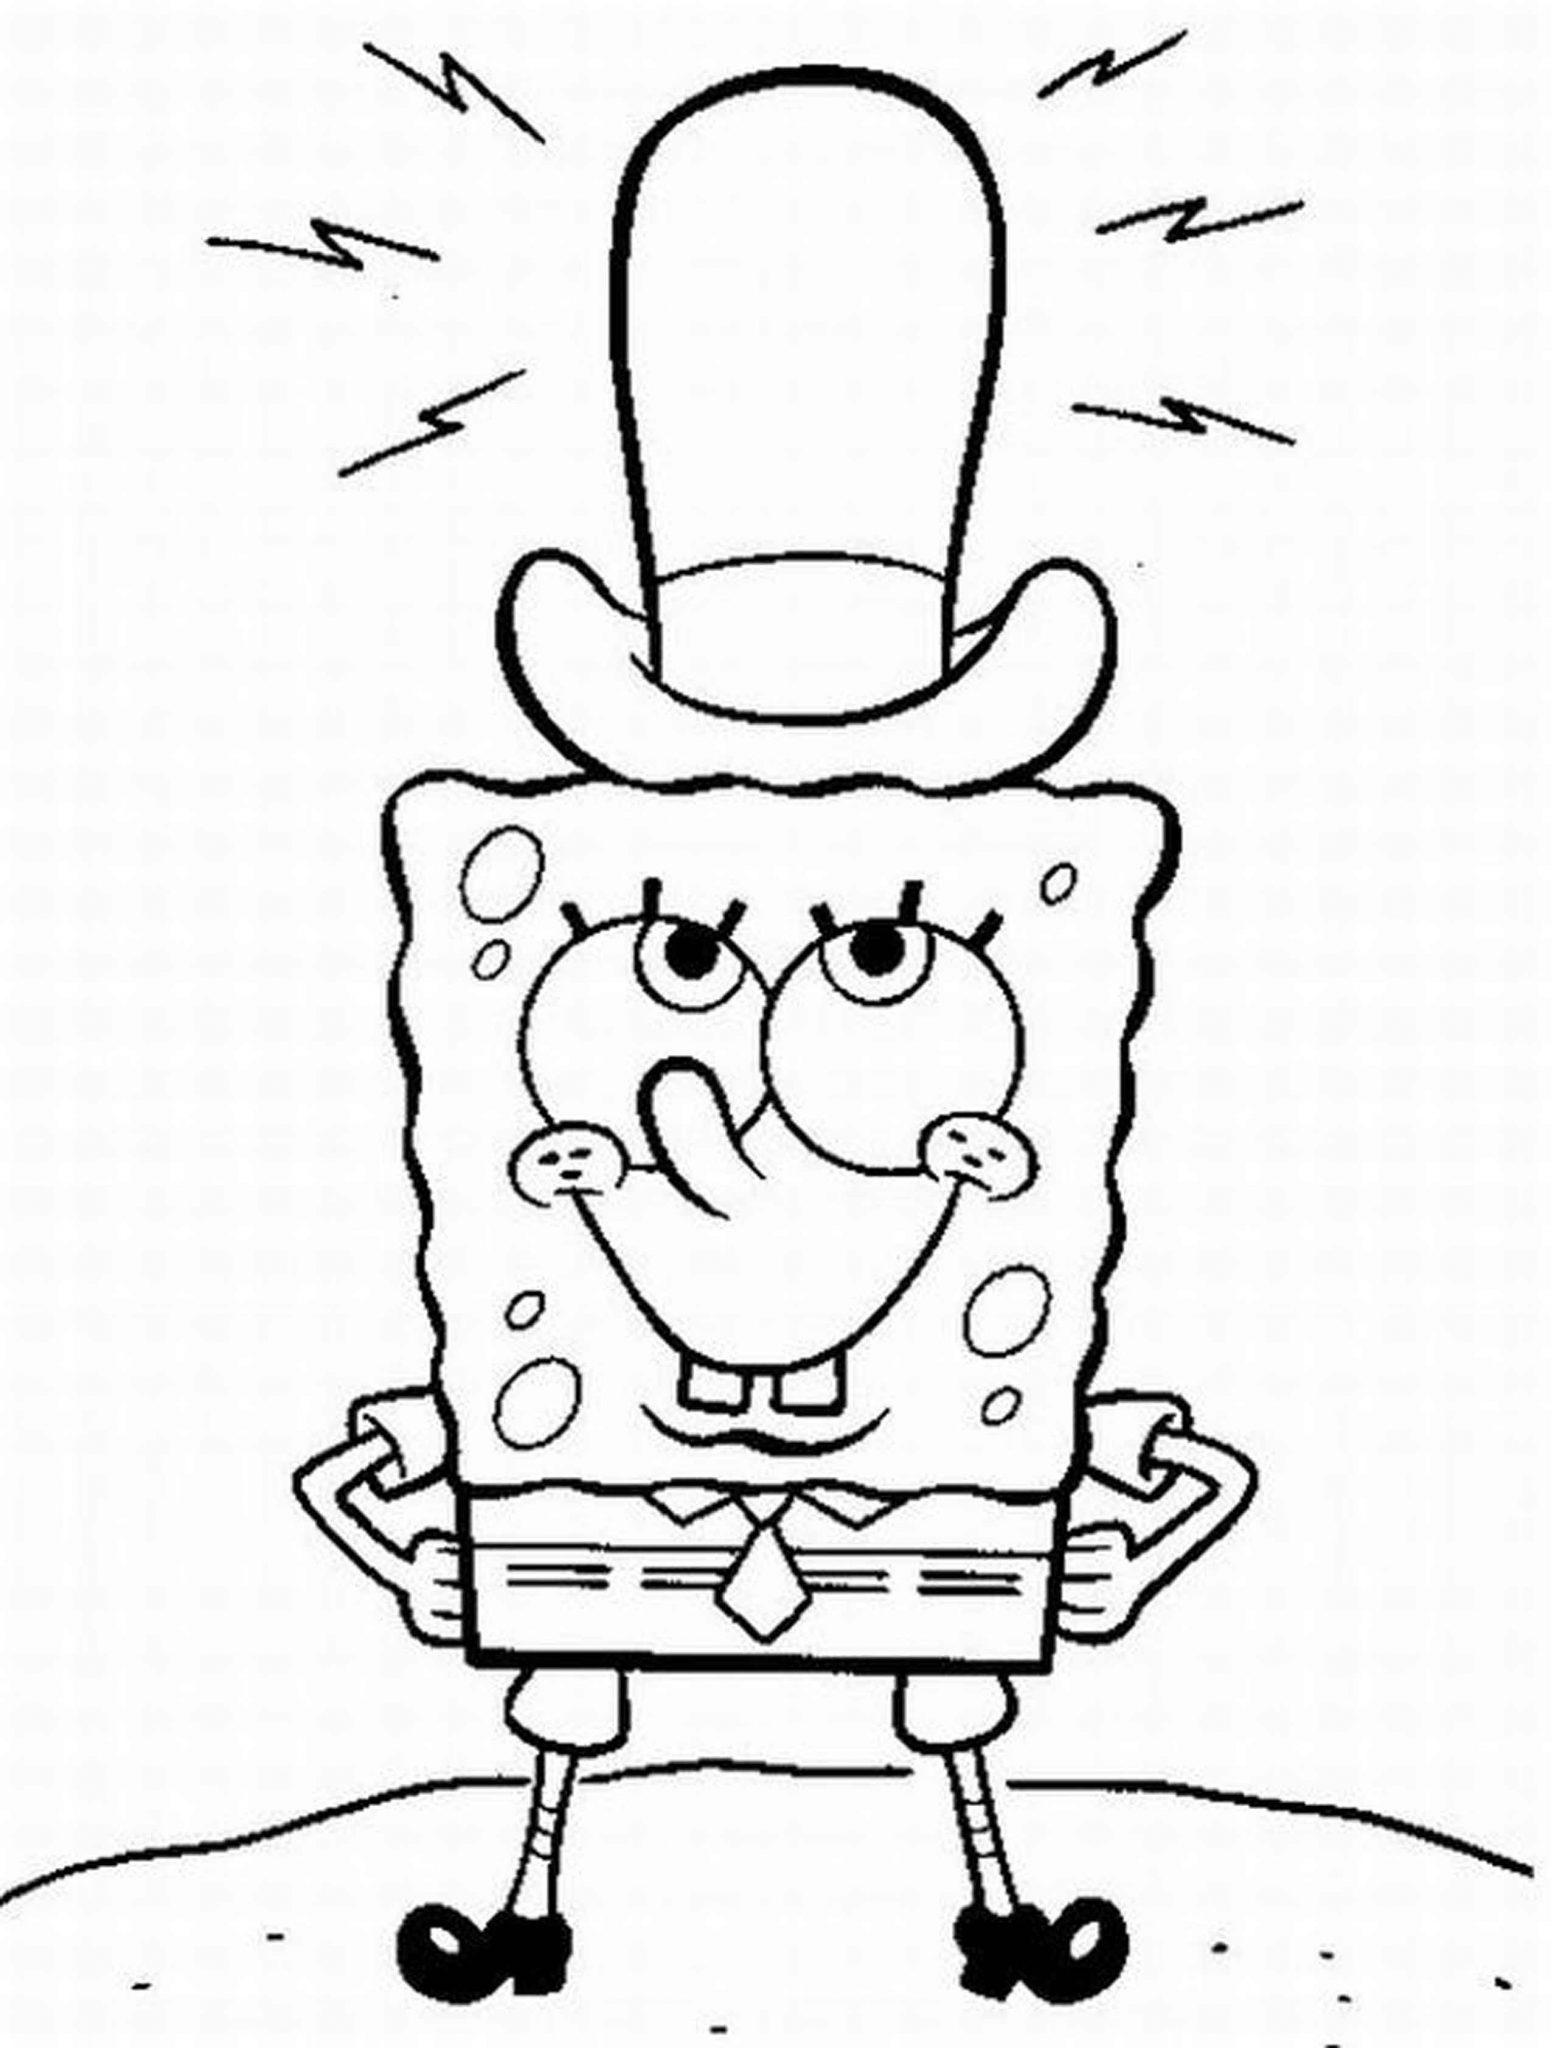 64 Spongebob Halloween Coloring Pages Download Free Images